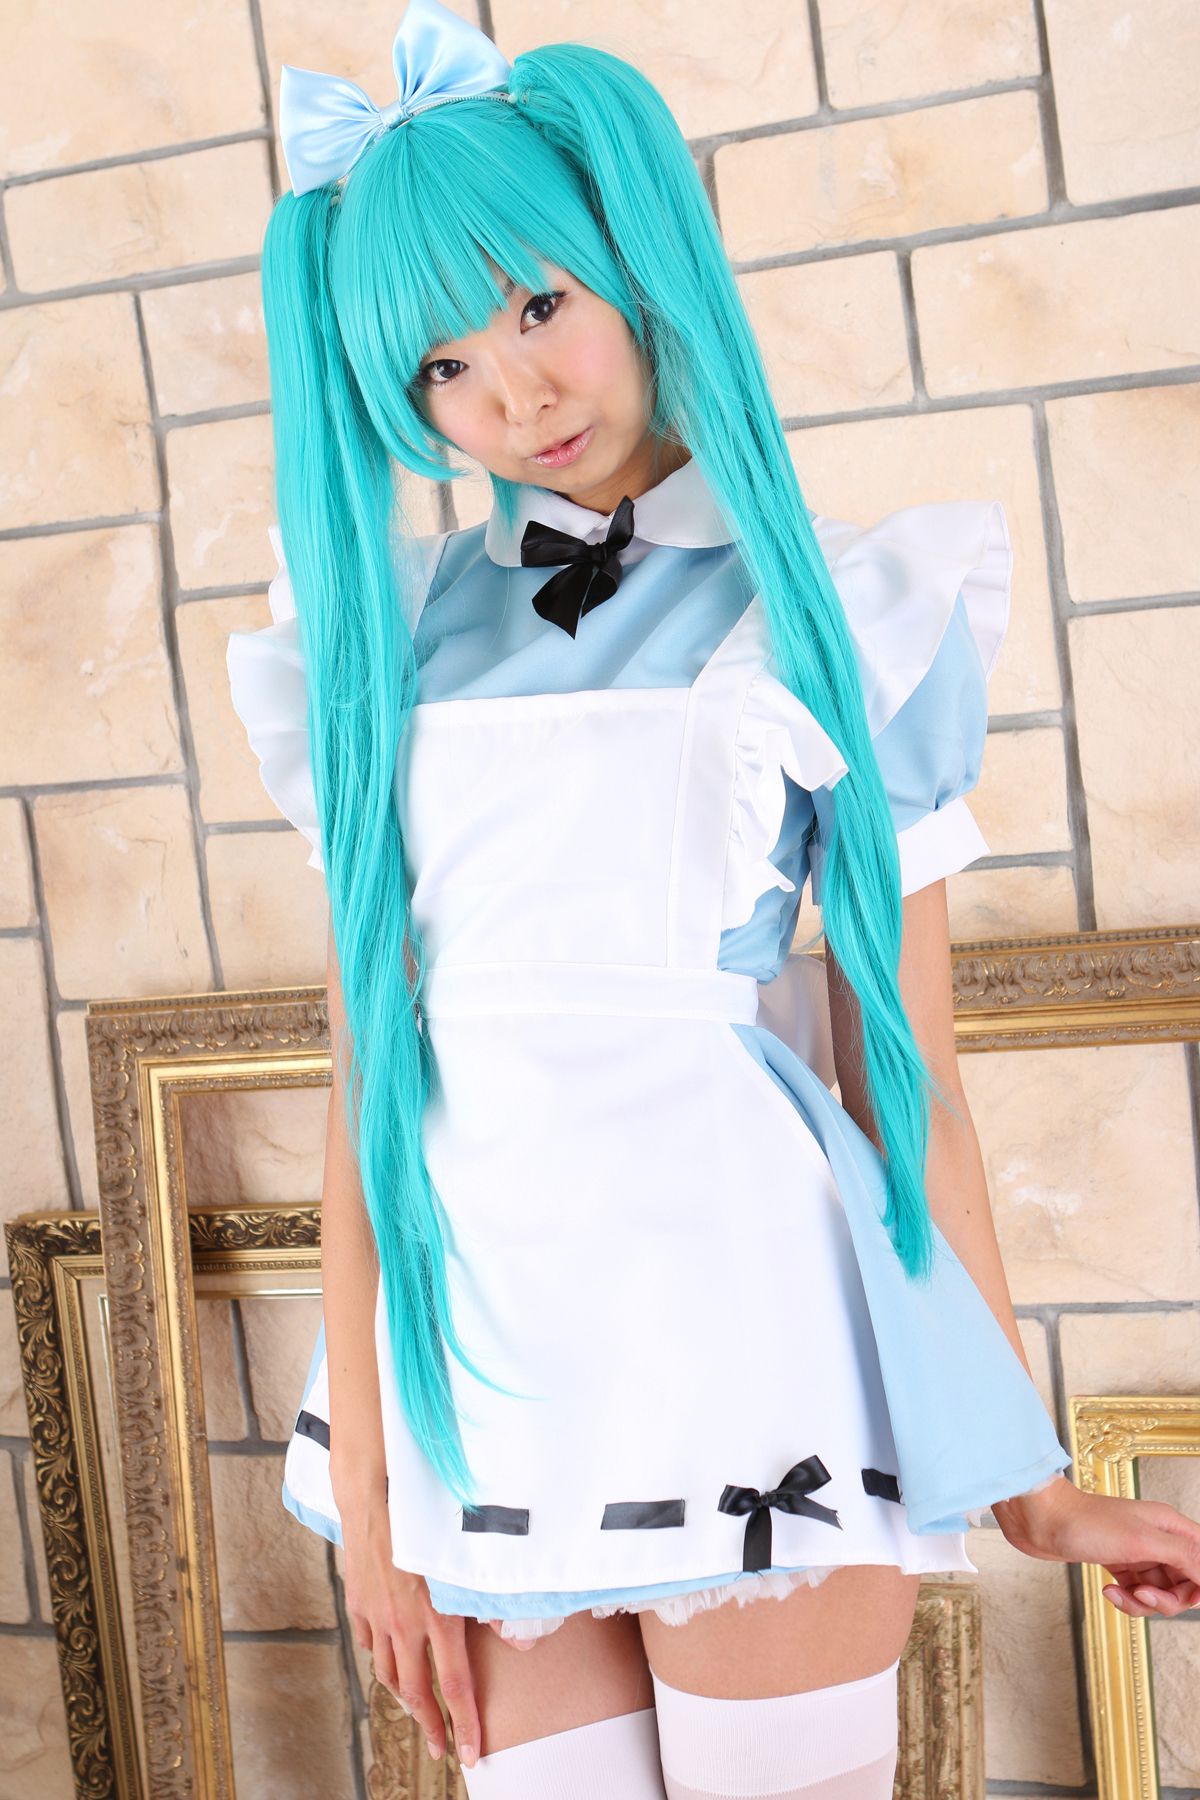 taotuhome[Cosplay套图] New Hatsune Miku from Vocaloid - So Sexy第65张